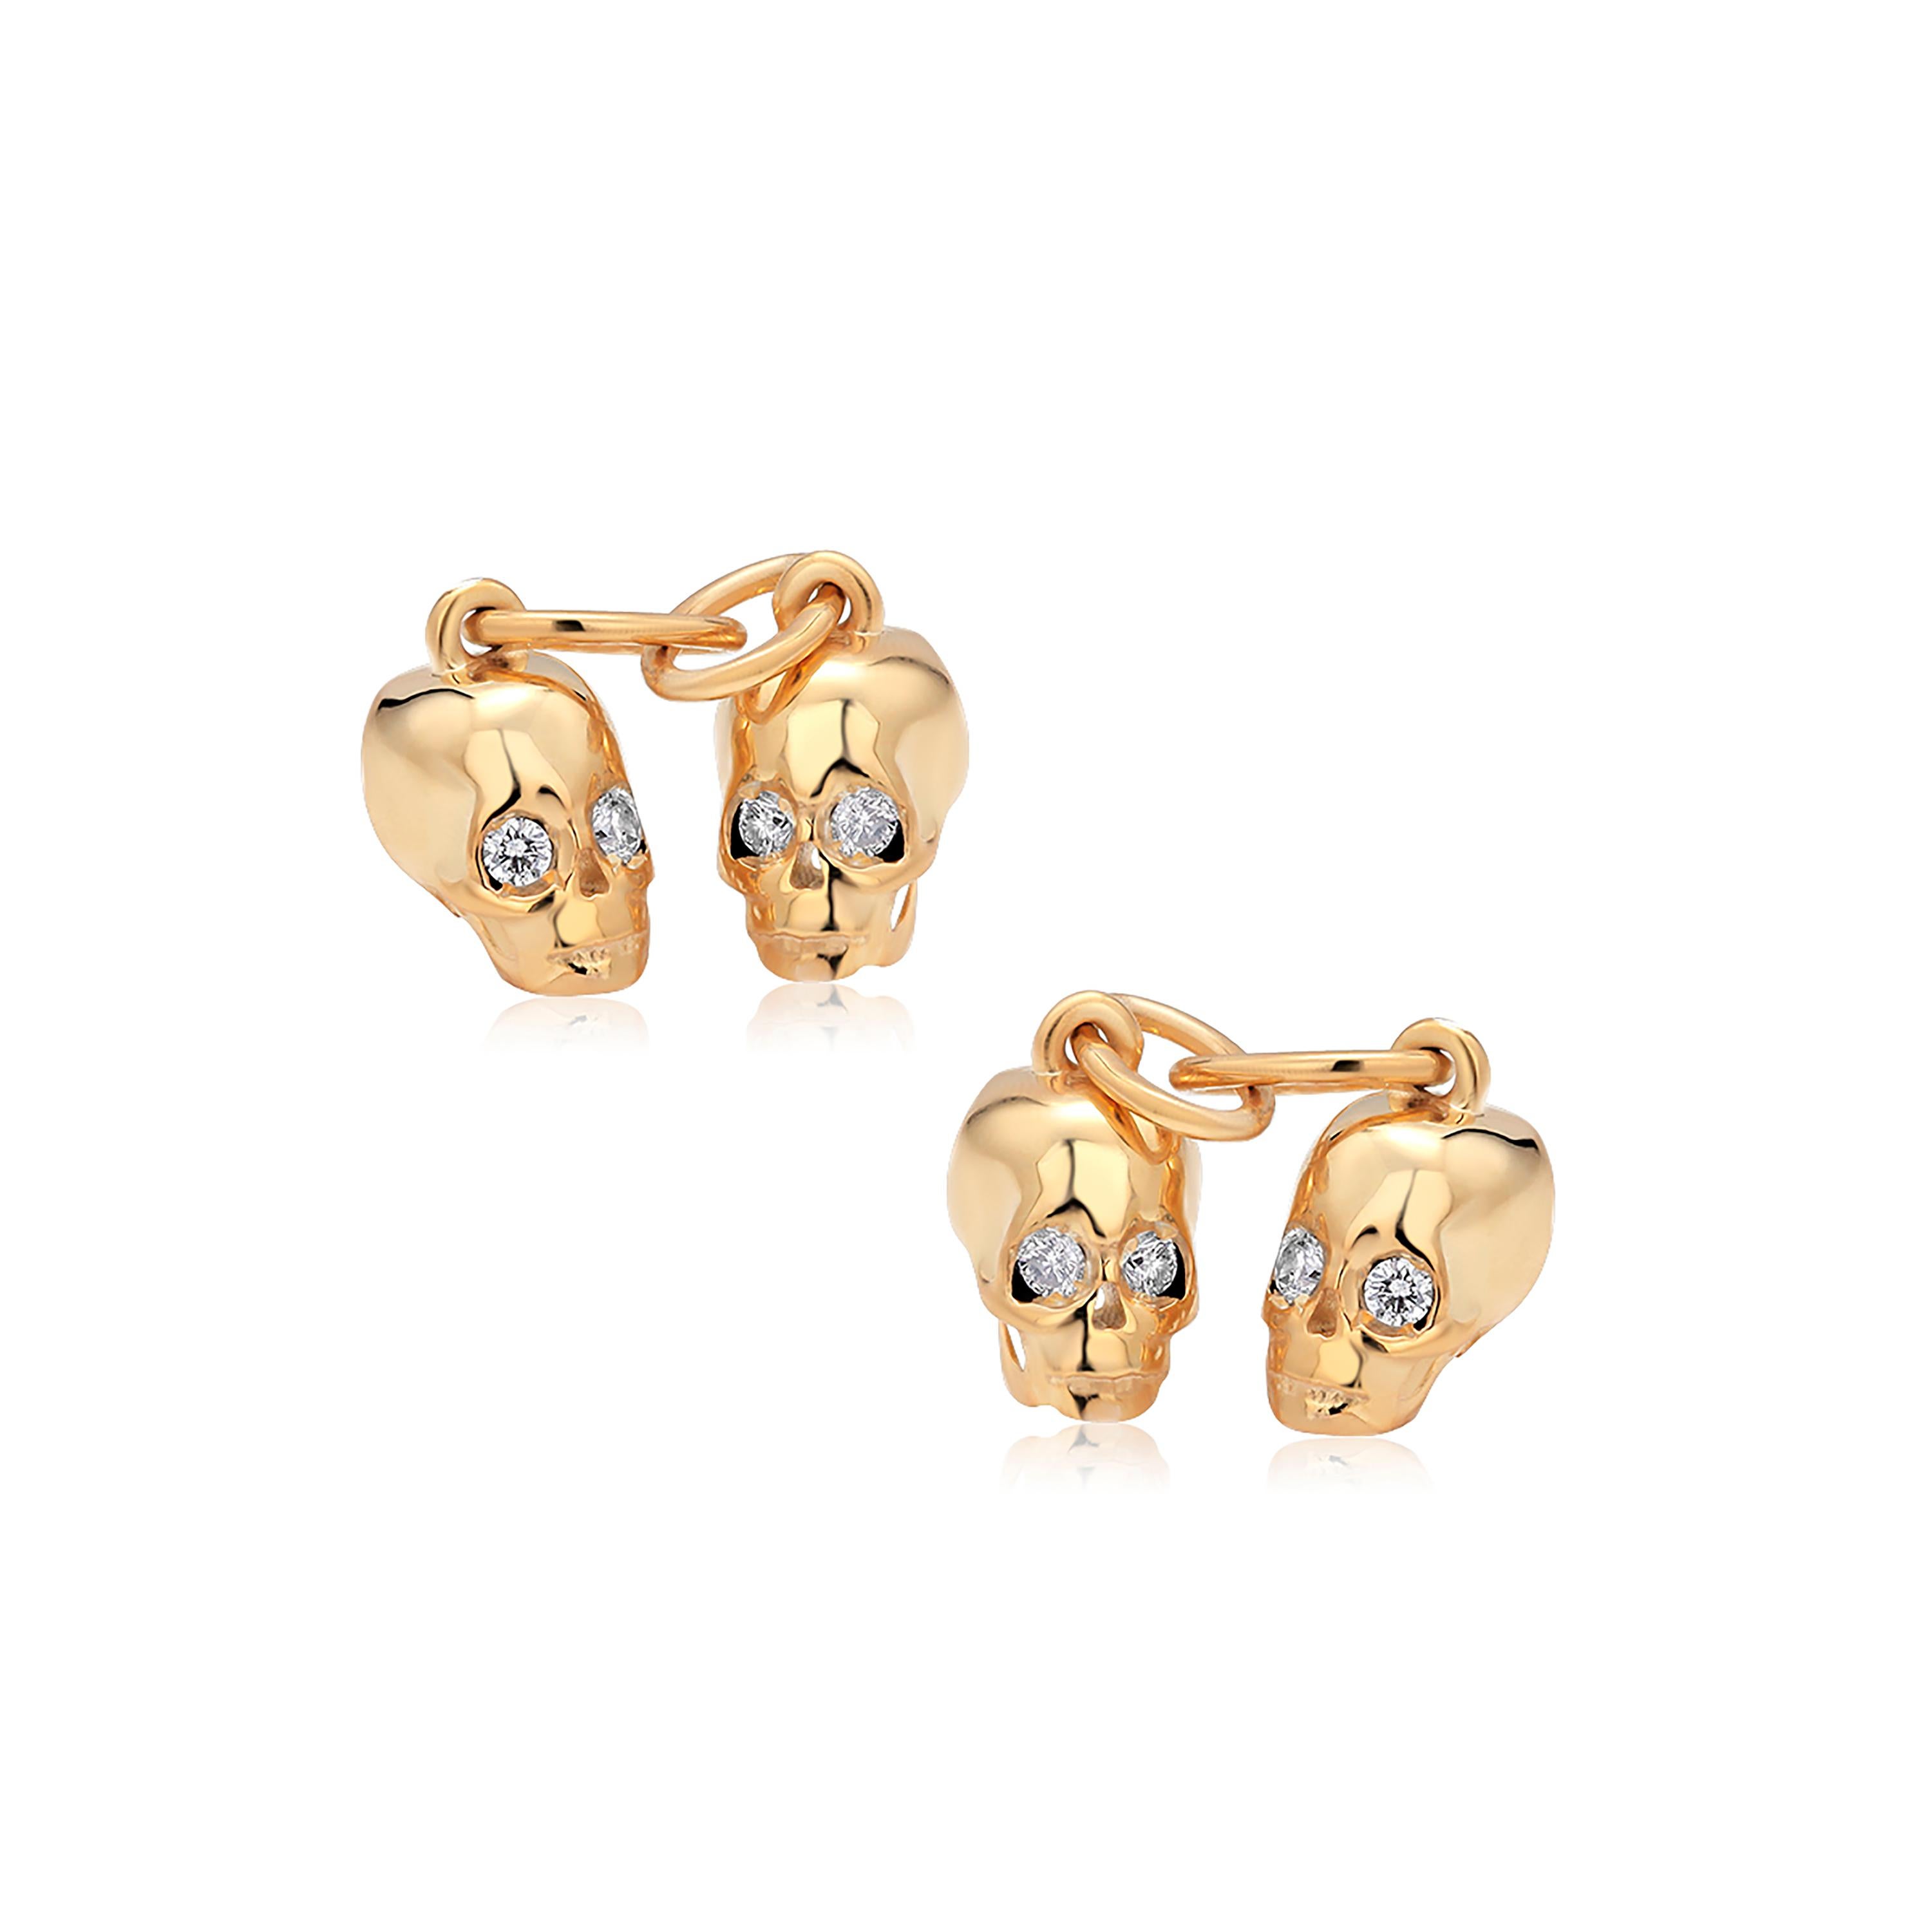 Sterling Silver double-sided cufflinks 
Four skull-shaped charms
Cufflinks measuring one inch
Four round genuine natural diamonds weighing 0.15 carats
New cufflinks
Yellow gold plated 
